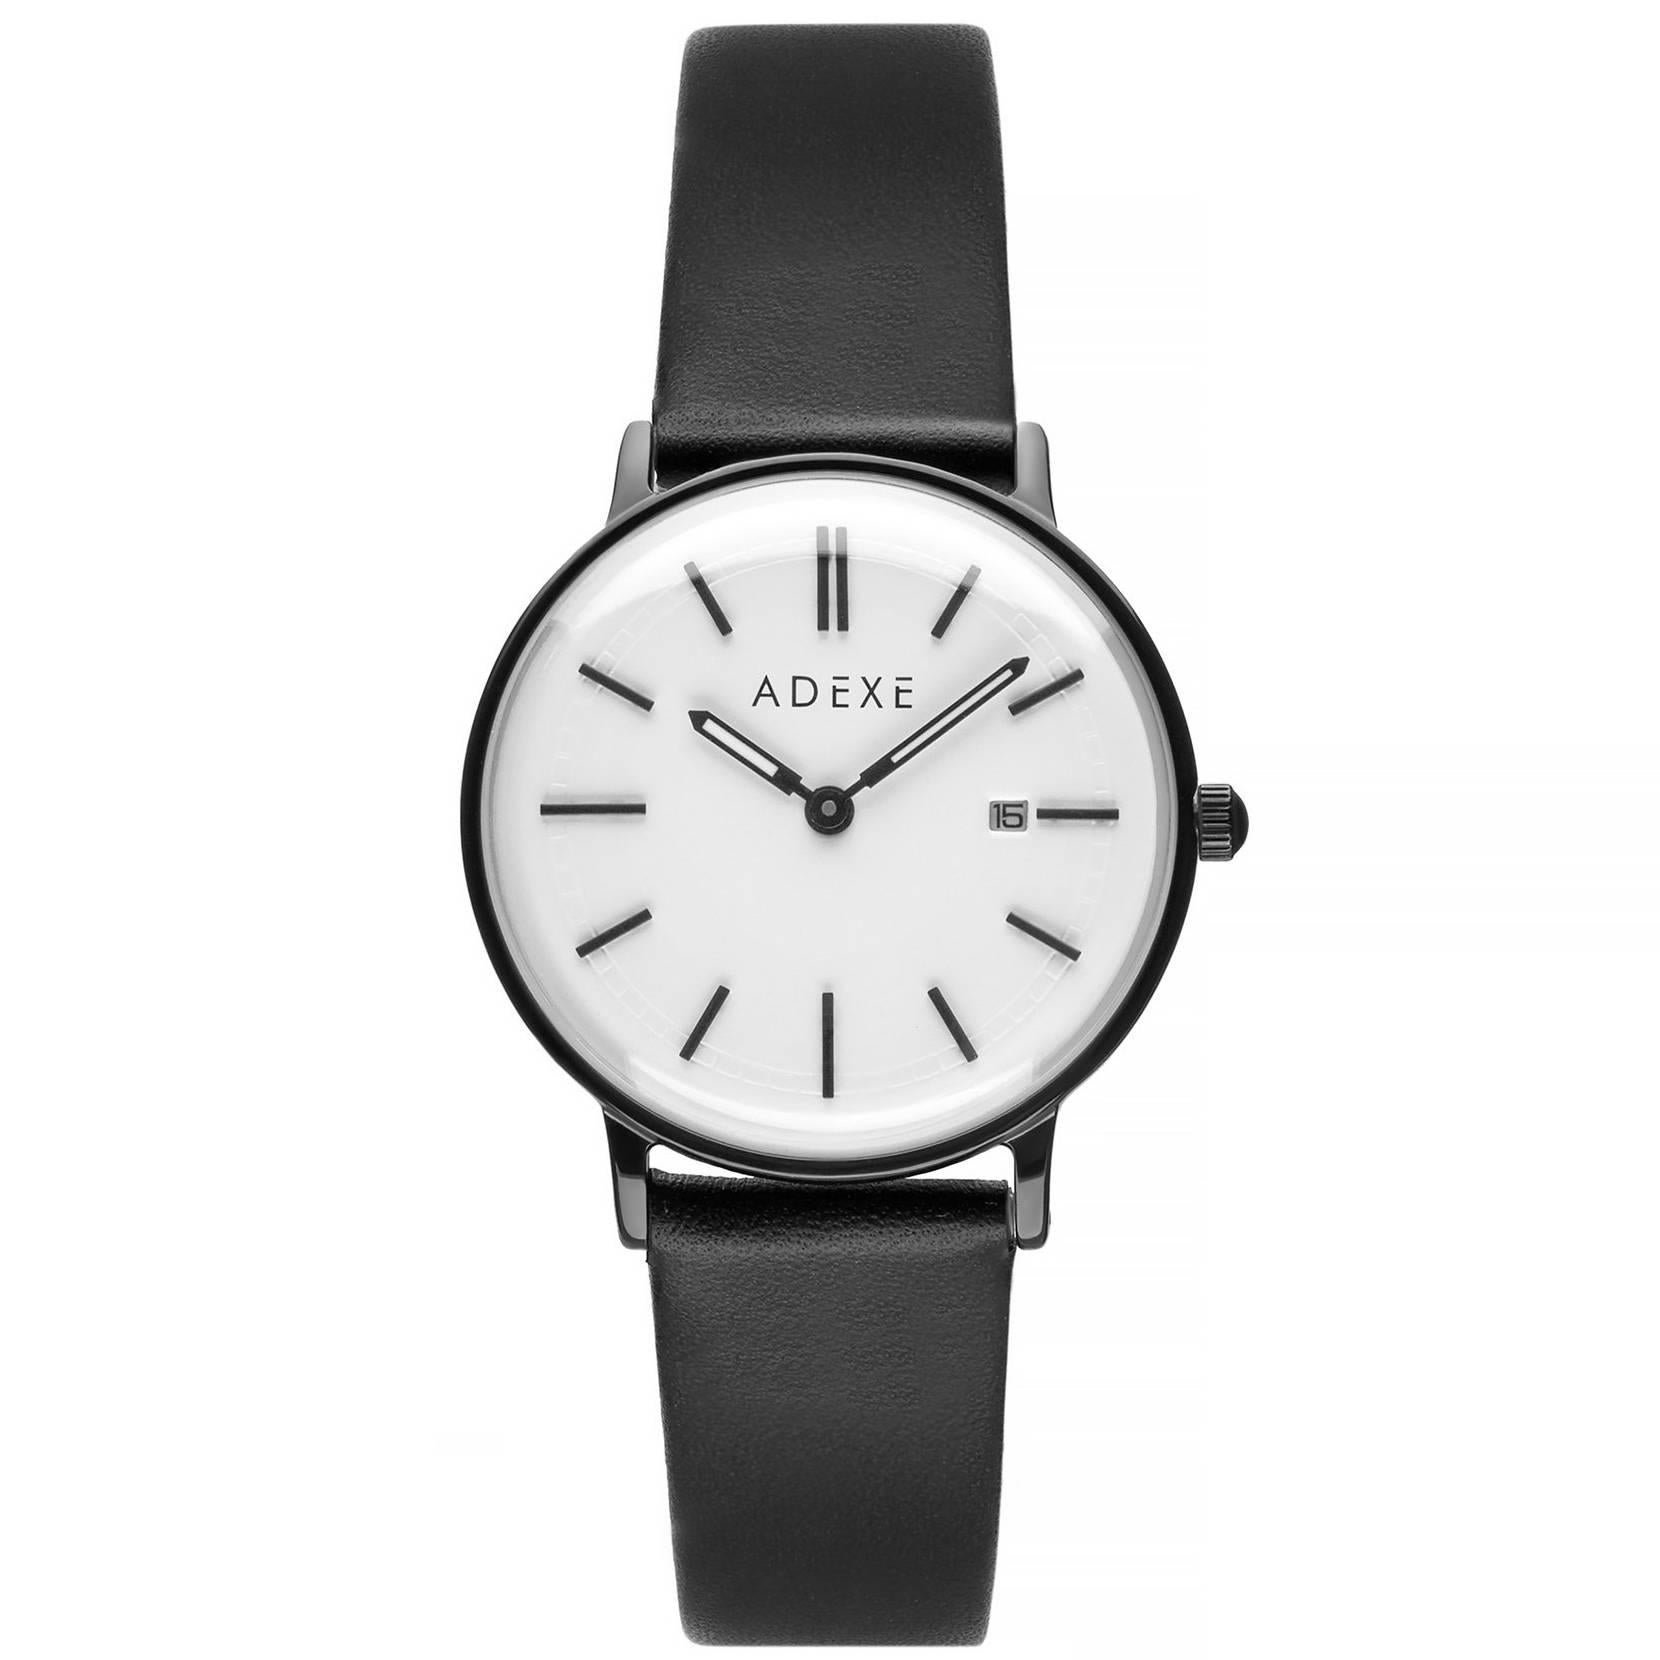 Adexe Stainless Steel Meek Black and White Japanese Quartz Wristwatch For Sale